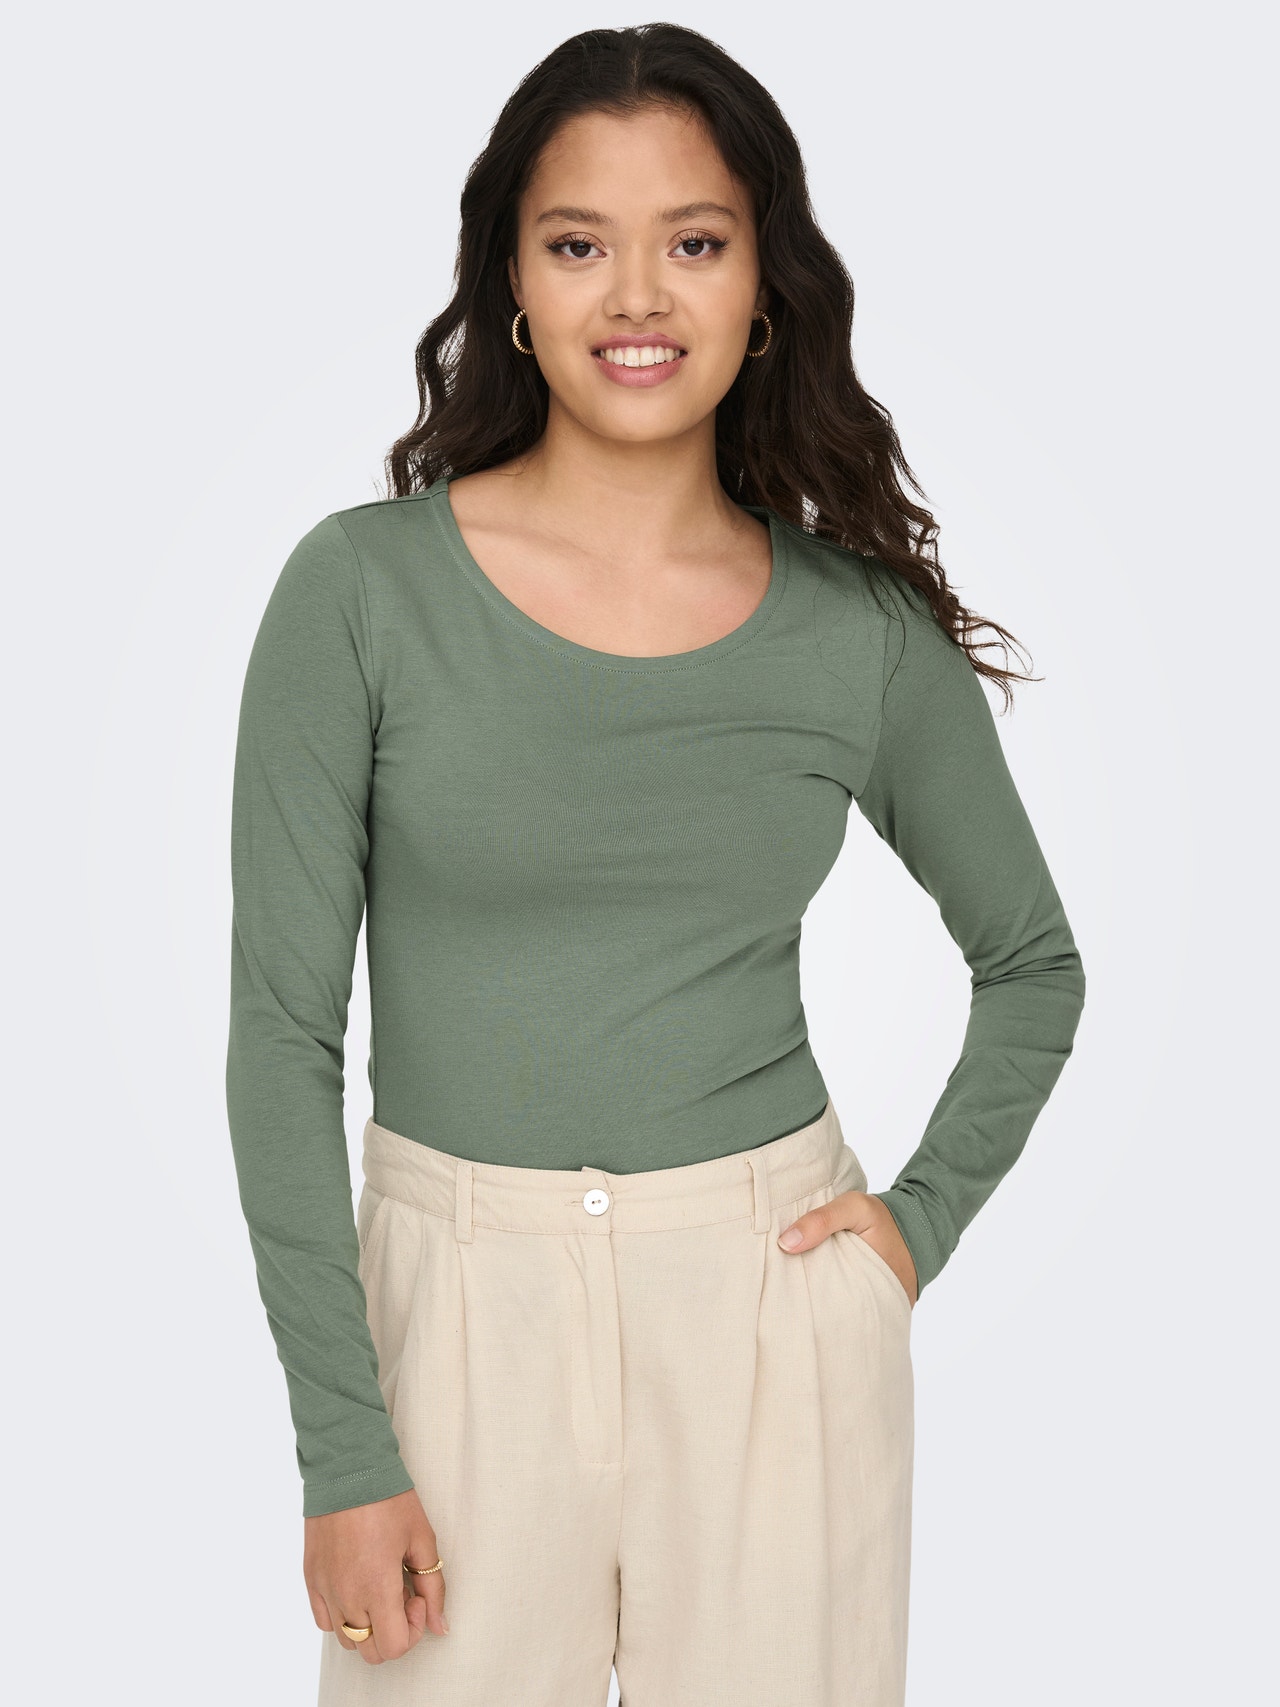 ONLY Tight fitted top -Sea Spray - 15300684